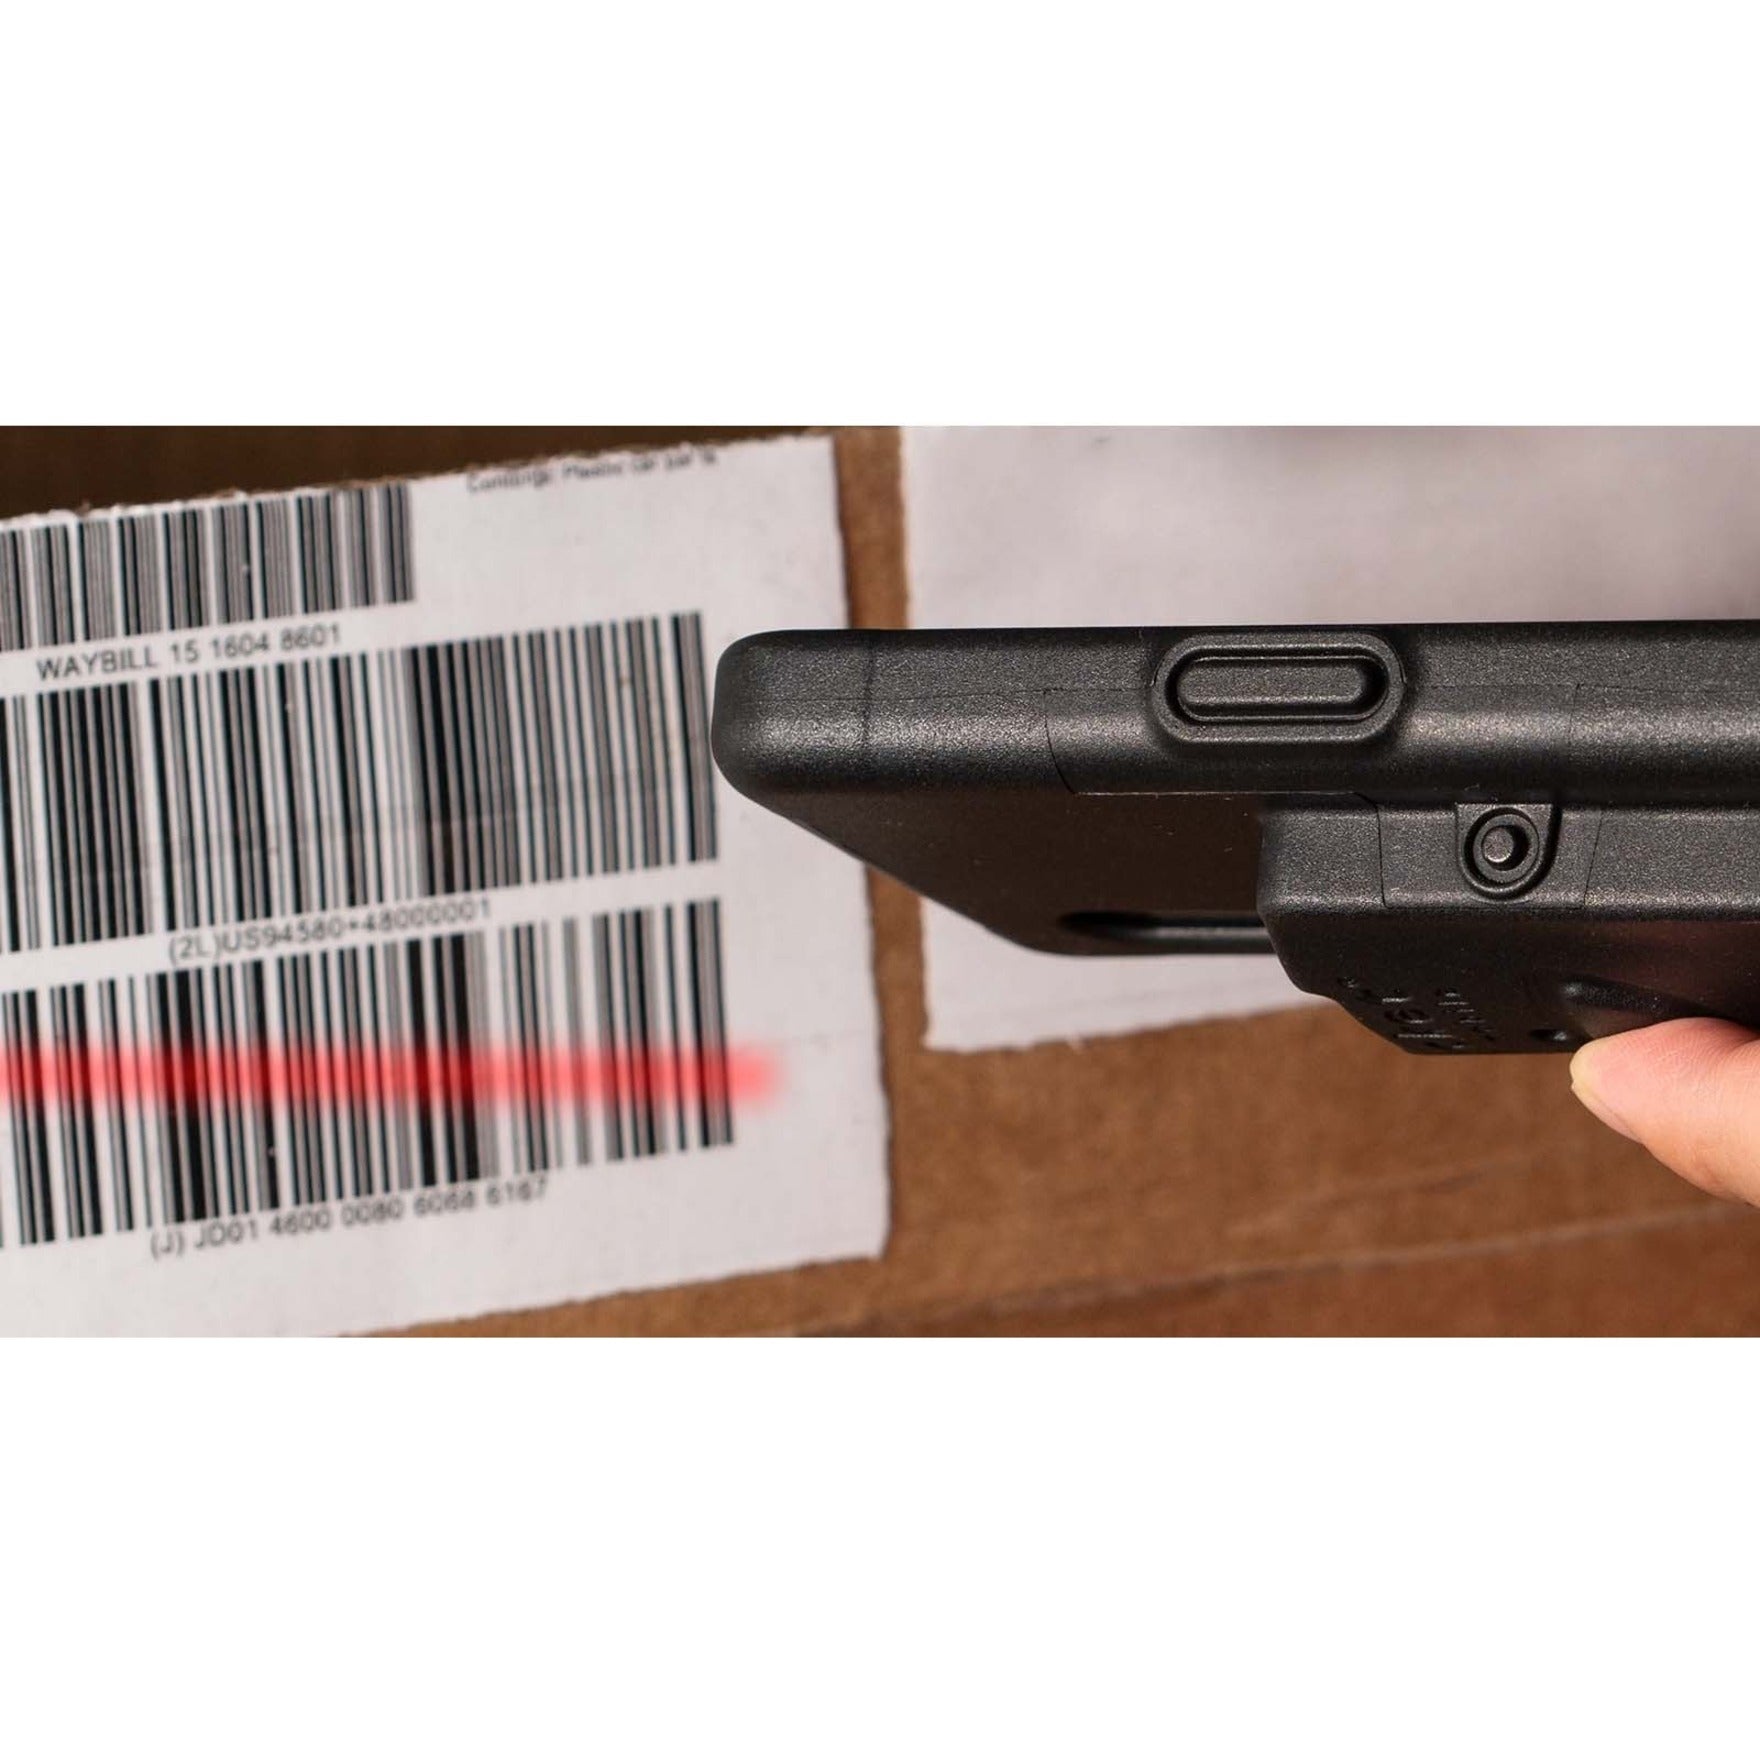 Socket Mobile CX4076-3143 DuraSled DS800 - 1D Linear Screen Barcode Sled Scanner, USB, Wireless, LED, Rugged [Discontinued]